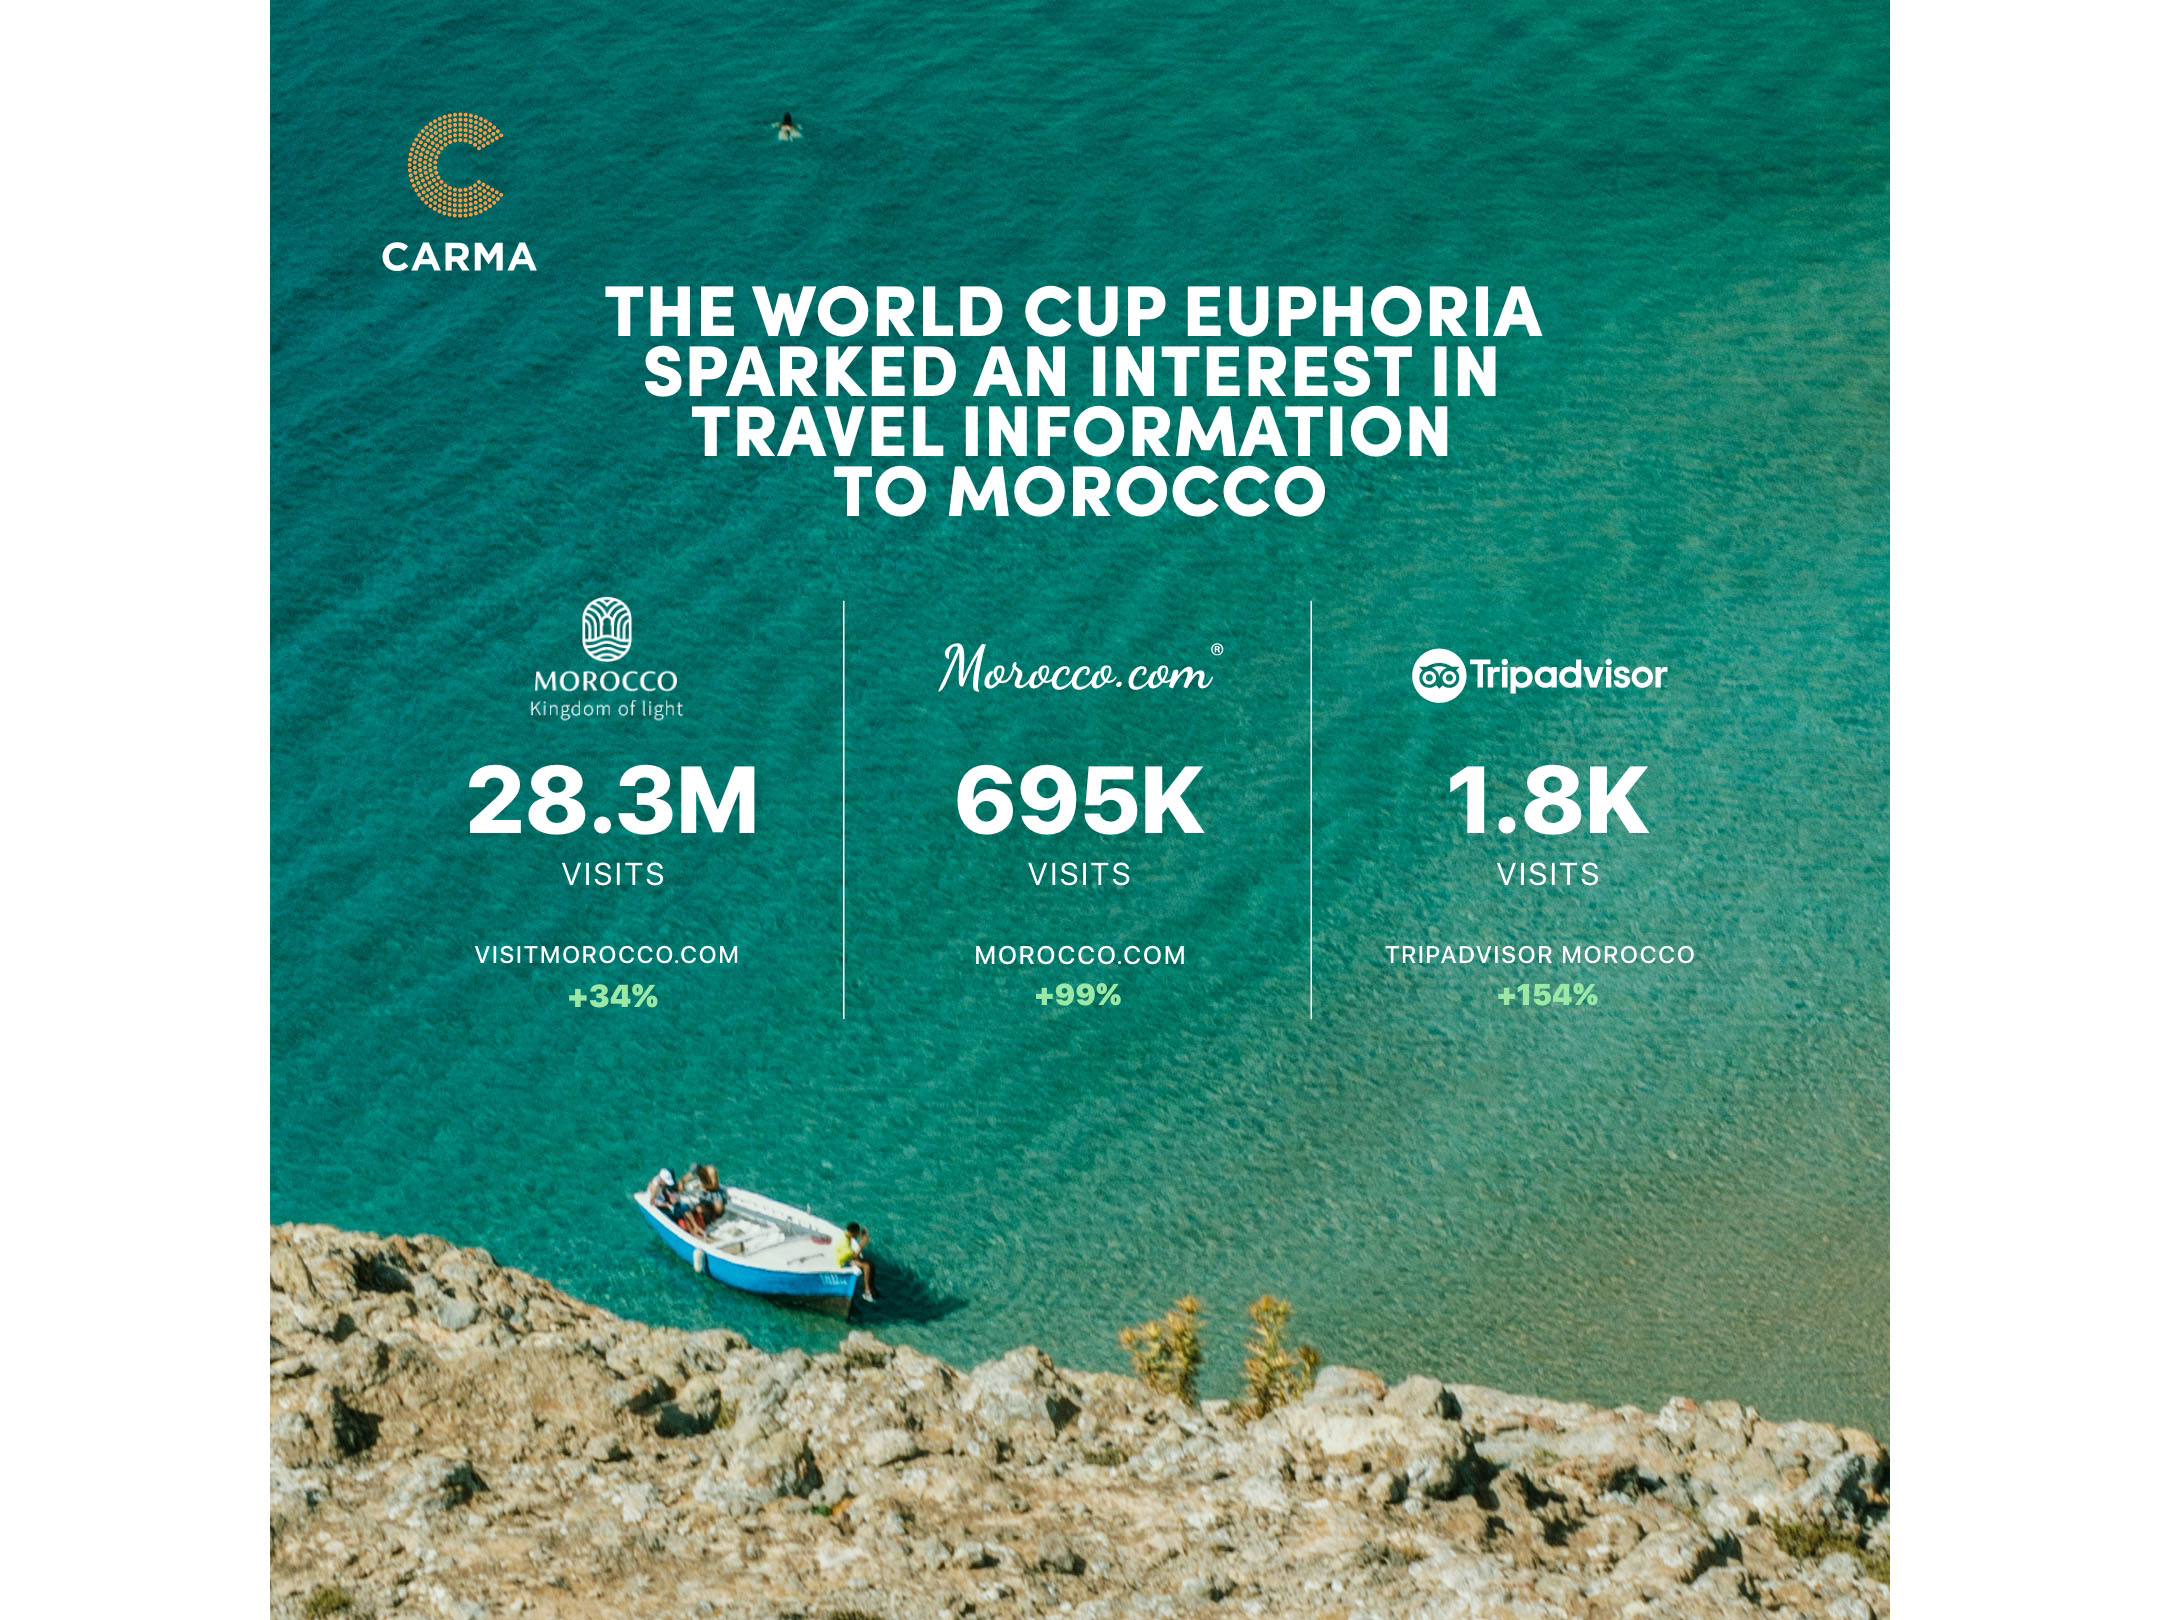 How Morocco’s perception has shifted after the FIFA World Cup Qatar 2022